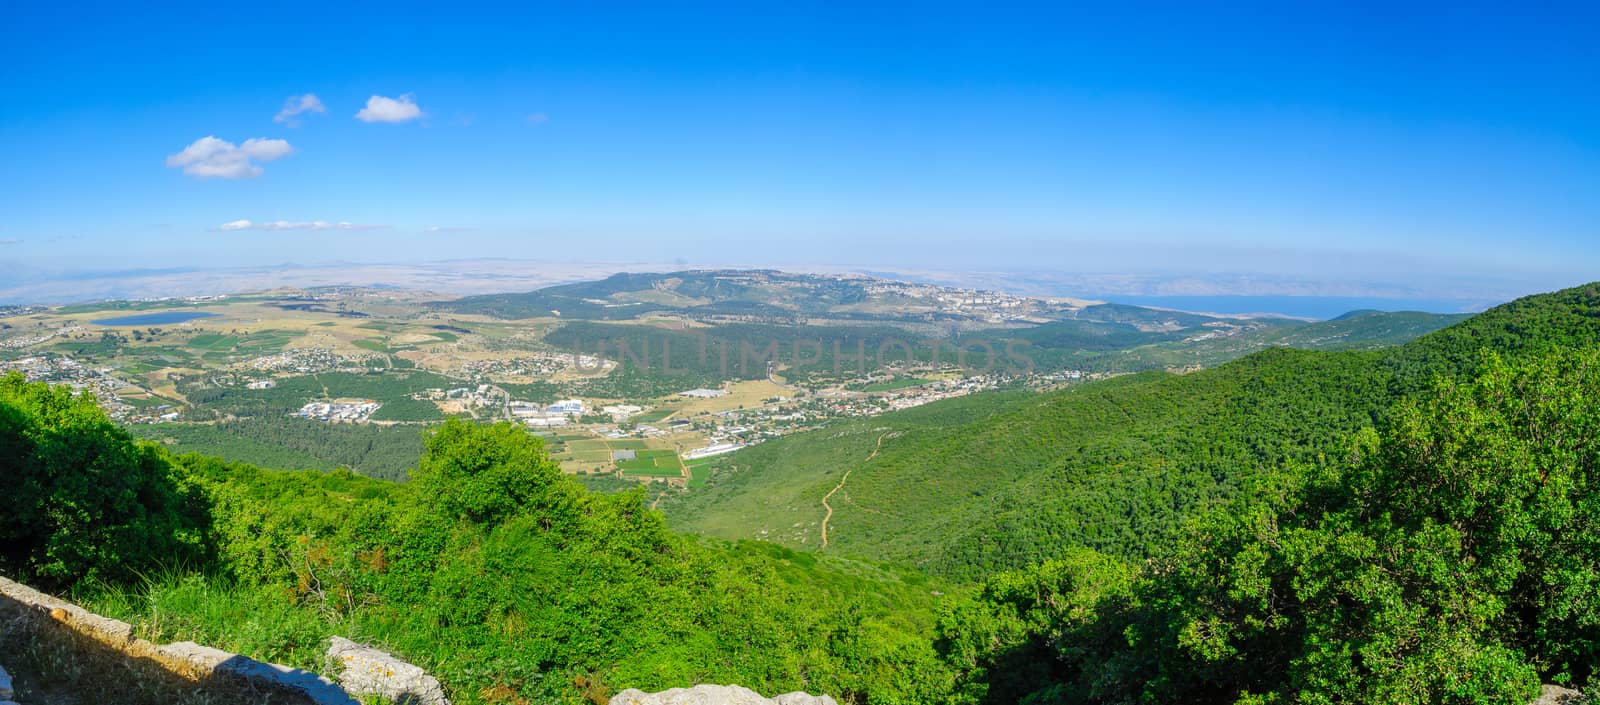 Panoramic landscape from Mount Meron in the upper Galilee, with the Sea of Galilee. Northern Israel